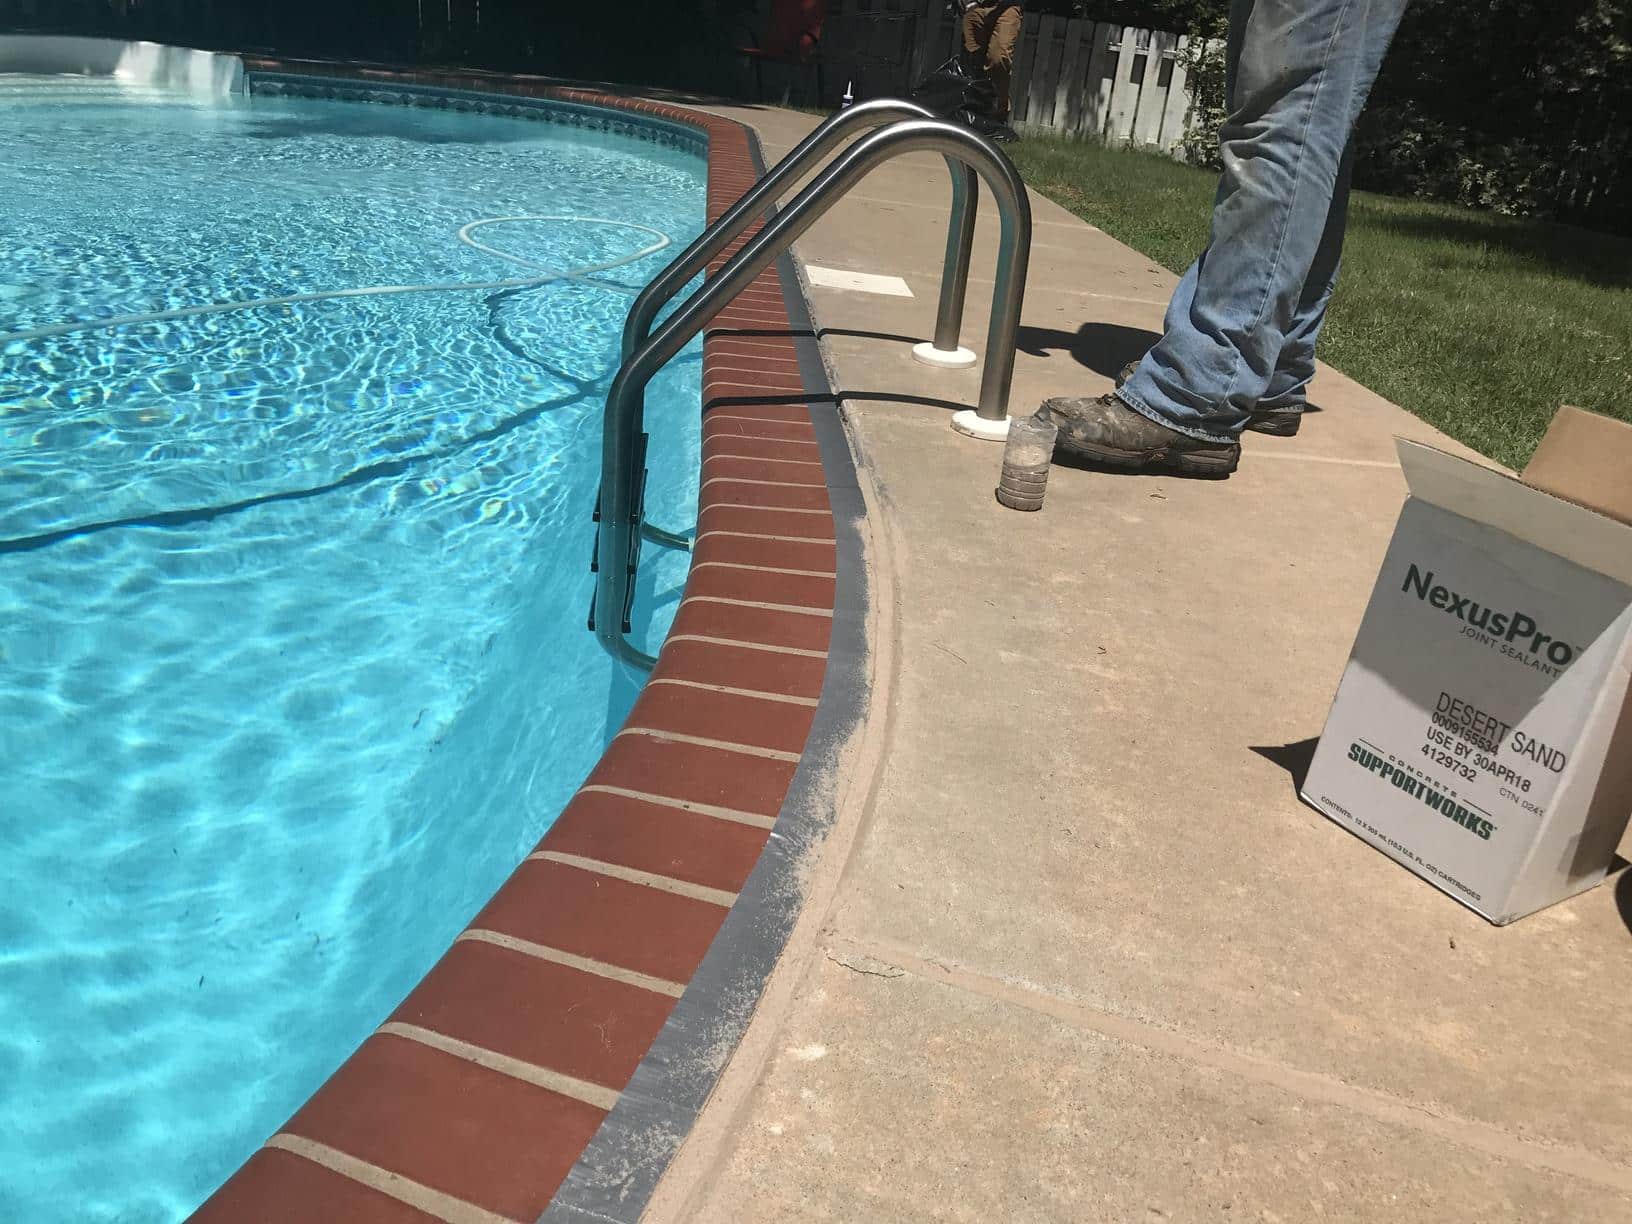 The pool edge is taped prior to finish for a nice clean edge.